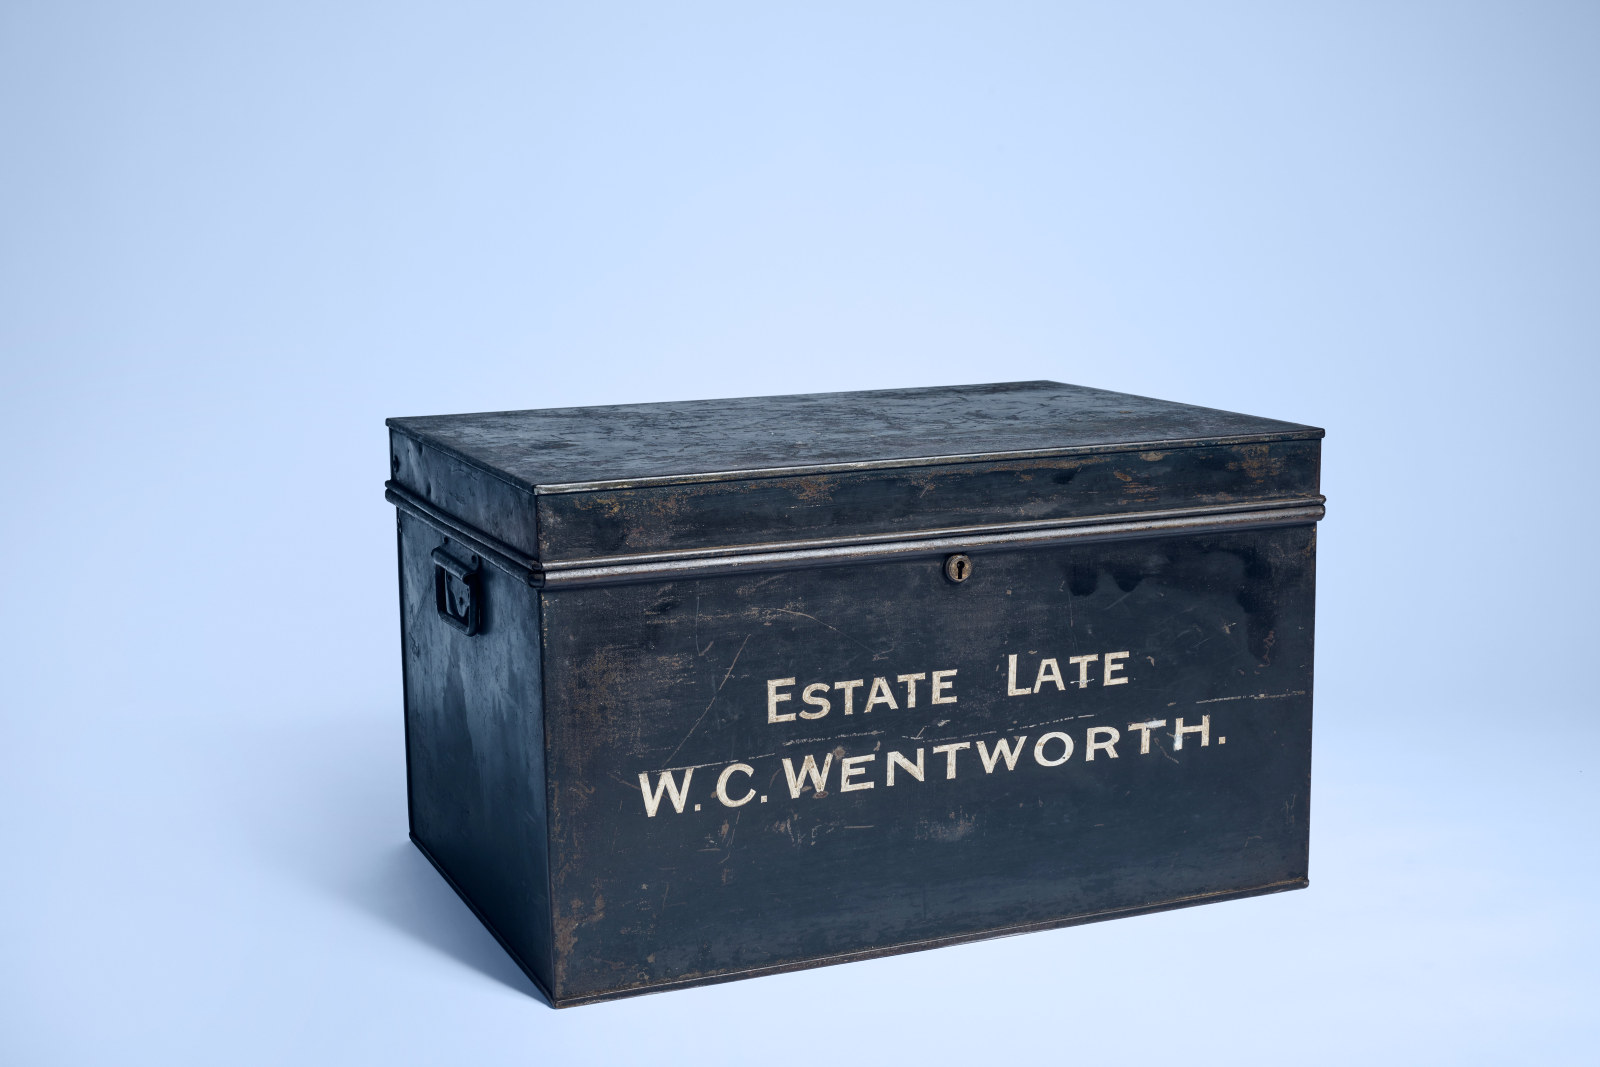 Steel Deed Box from Vaucluse House